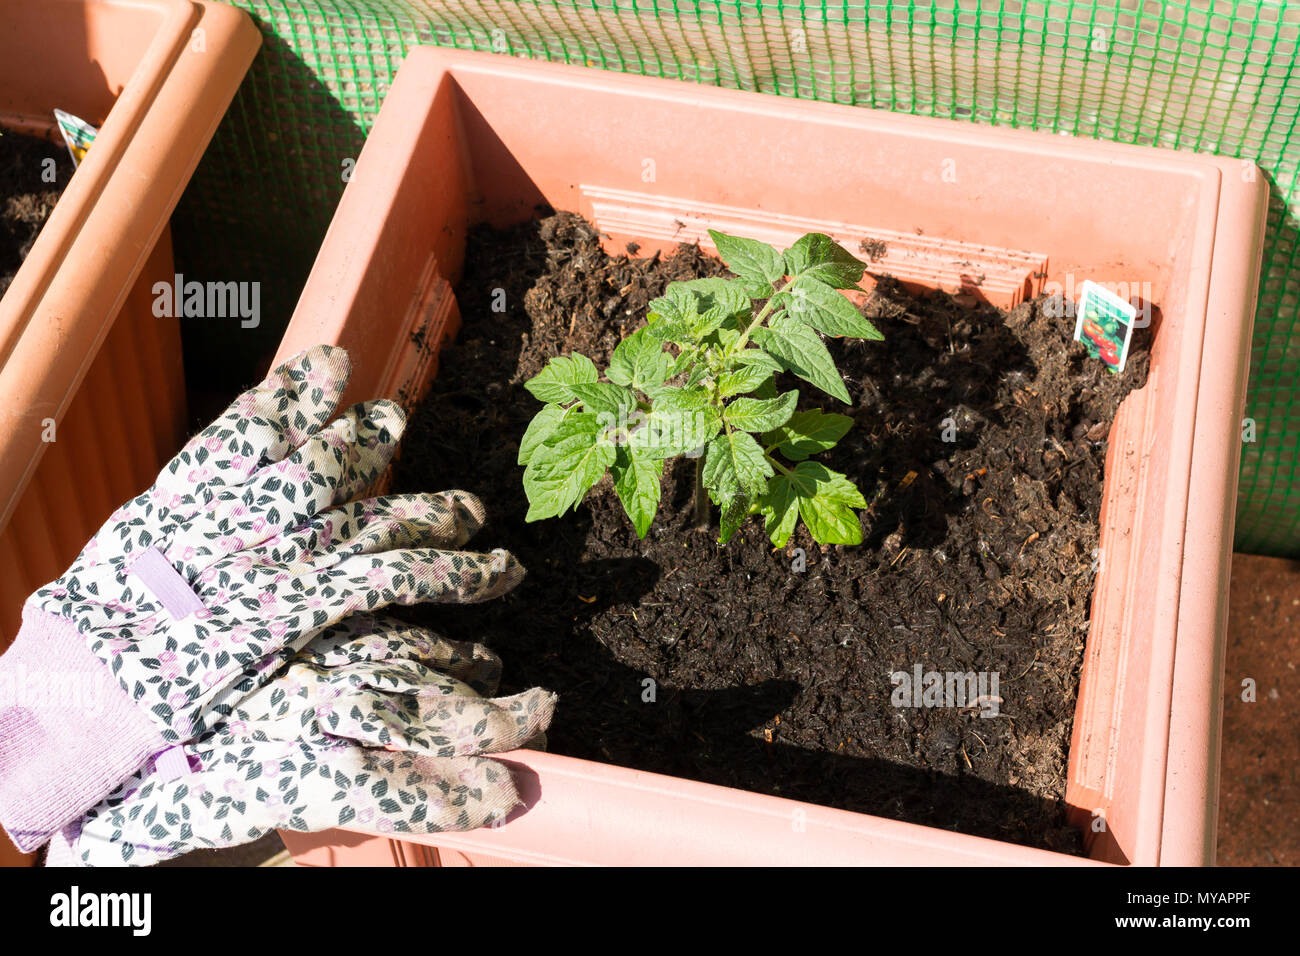 A newly planted Totem dwarf tomato plant in a garden pot with some gardening gloves in May early summer, Dorset, England, United Kingdom Stock Photo